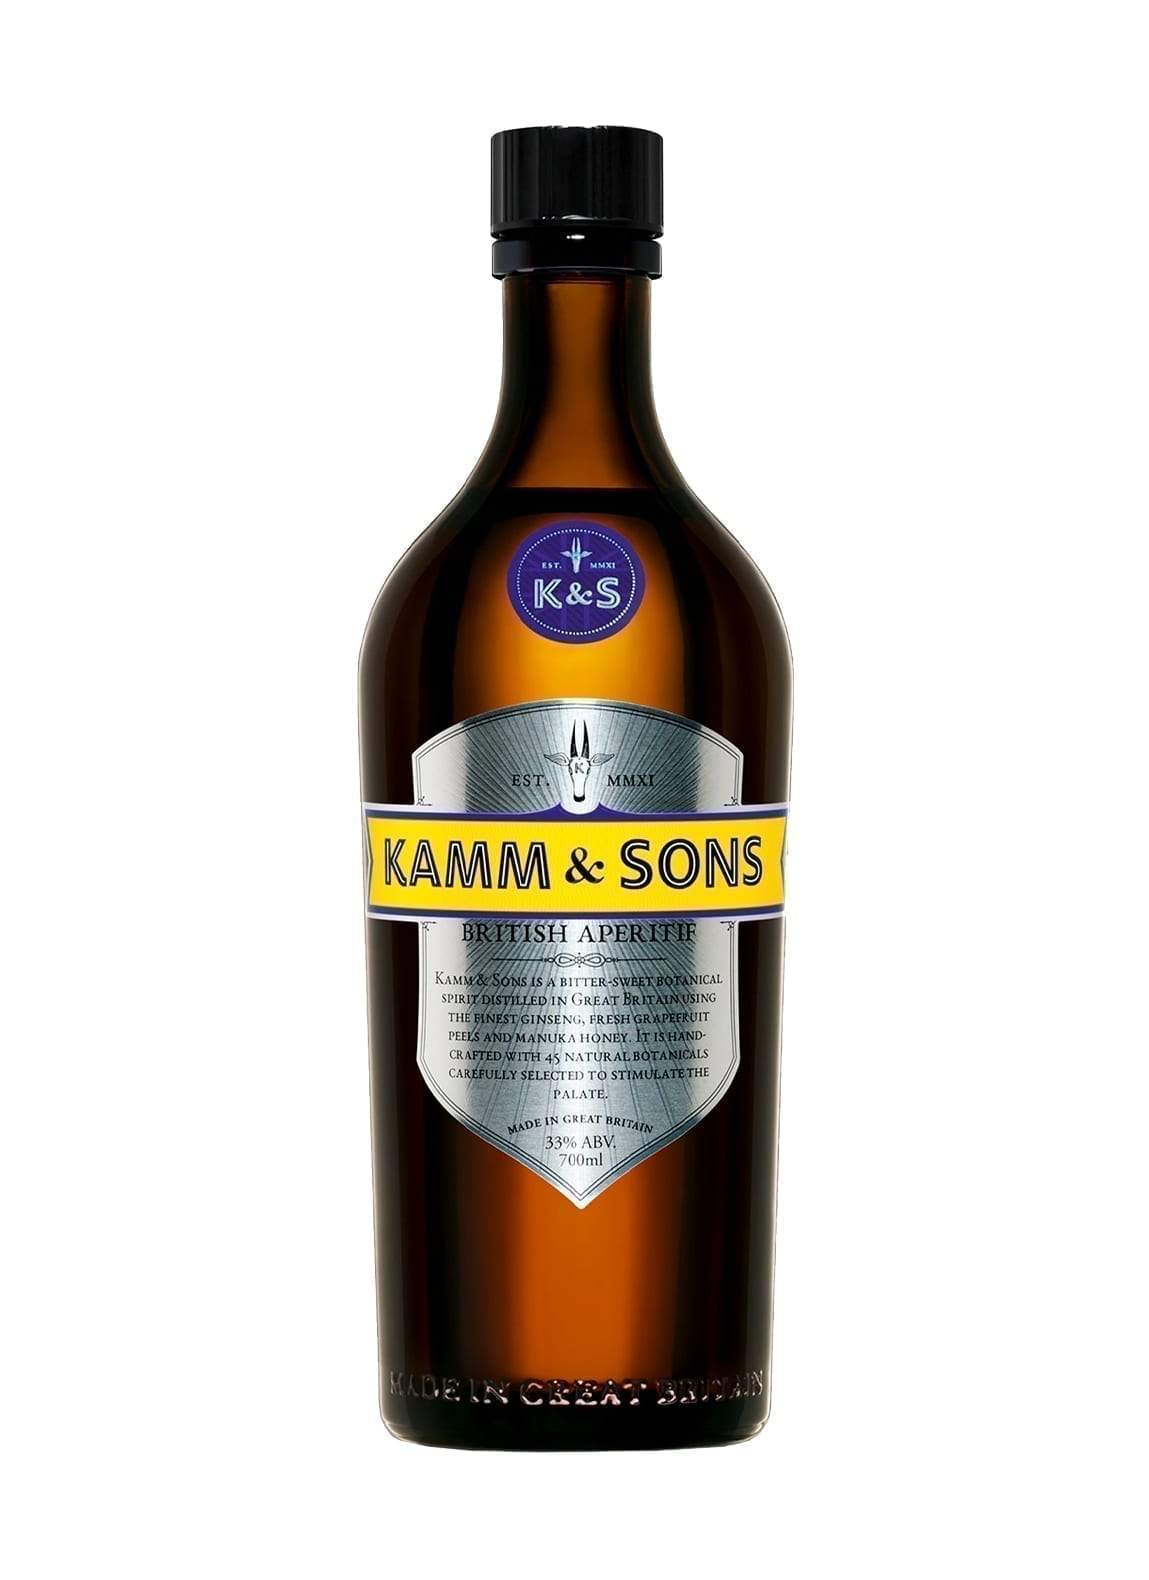 Kamm and Sons British Aperitif 33% 700ml | Alcoholic Beverages | Shop online at Spirits of France